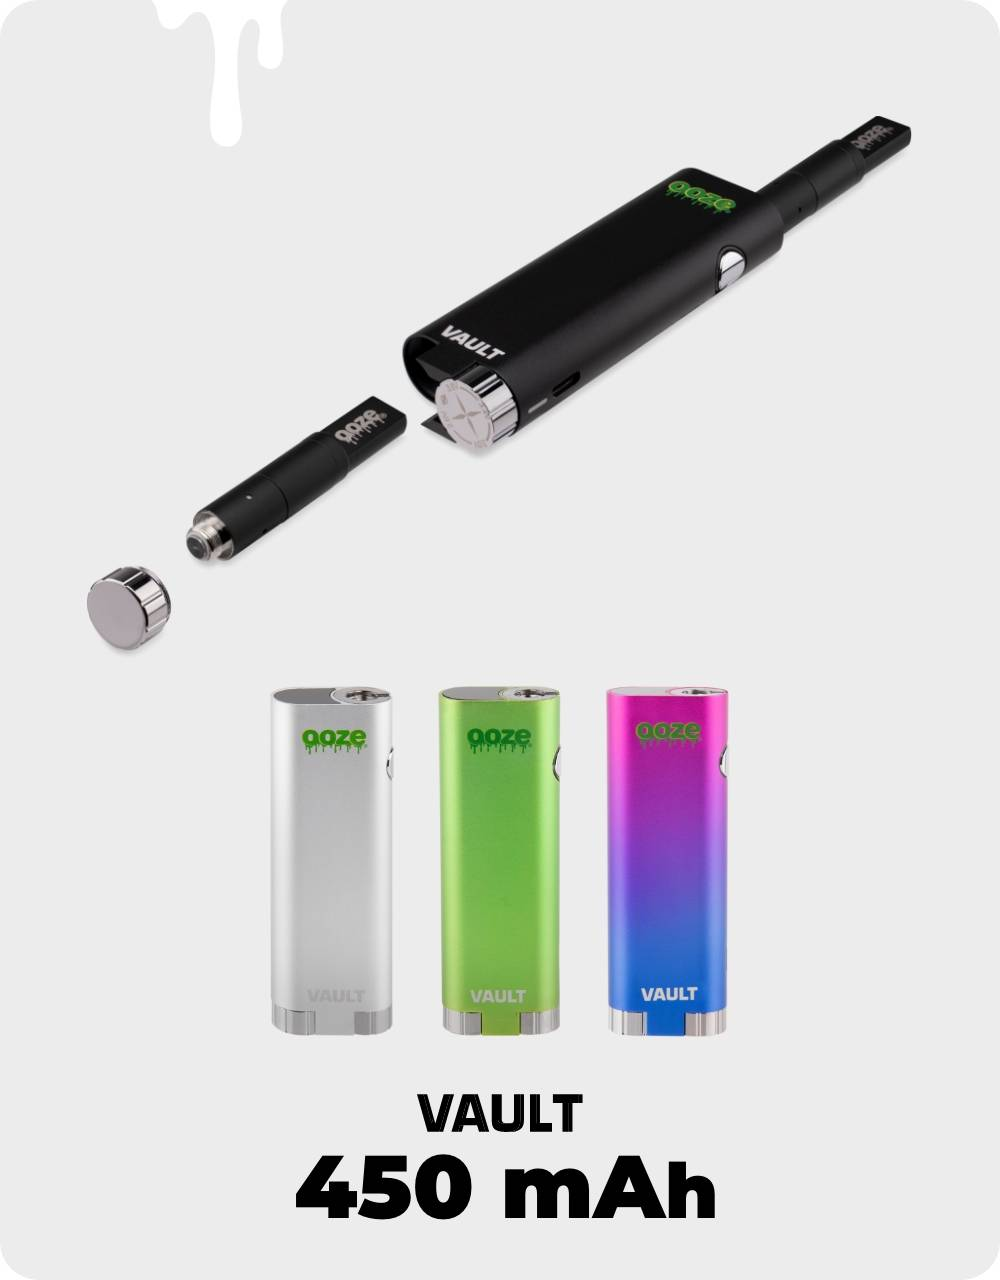 The 4 colors of the Ooze Vault vape pen battery are shown. The black Vault is shown at the top with the secret compartment opened to reveal the hidden atomizer. The bottom says 450 mAh.